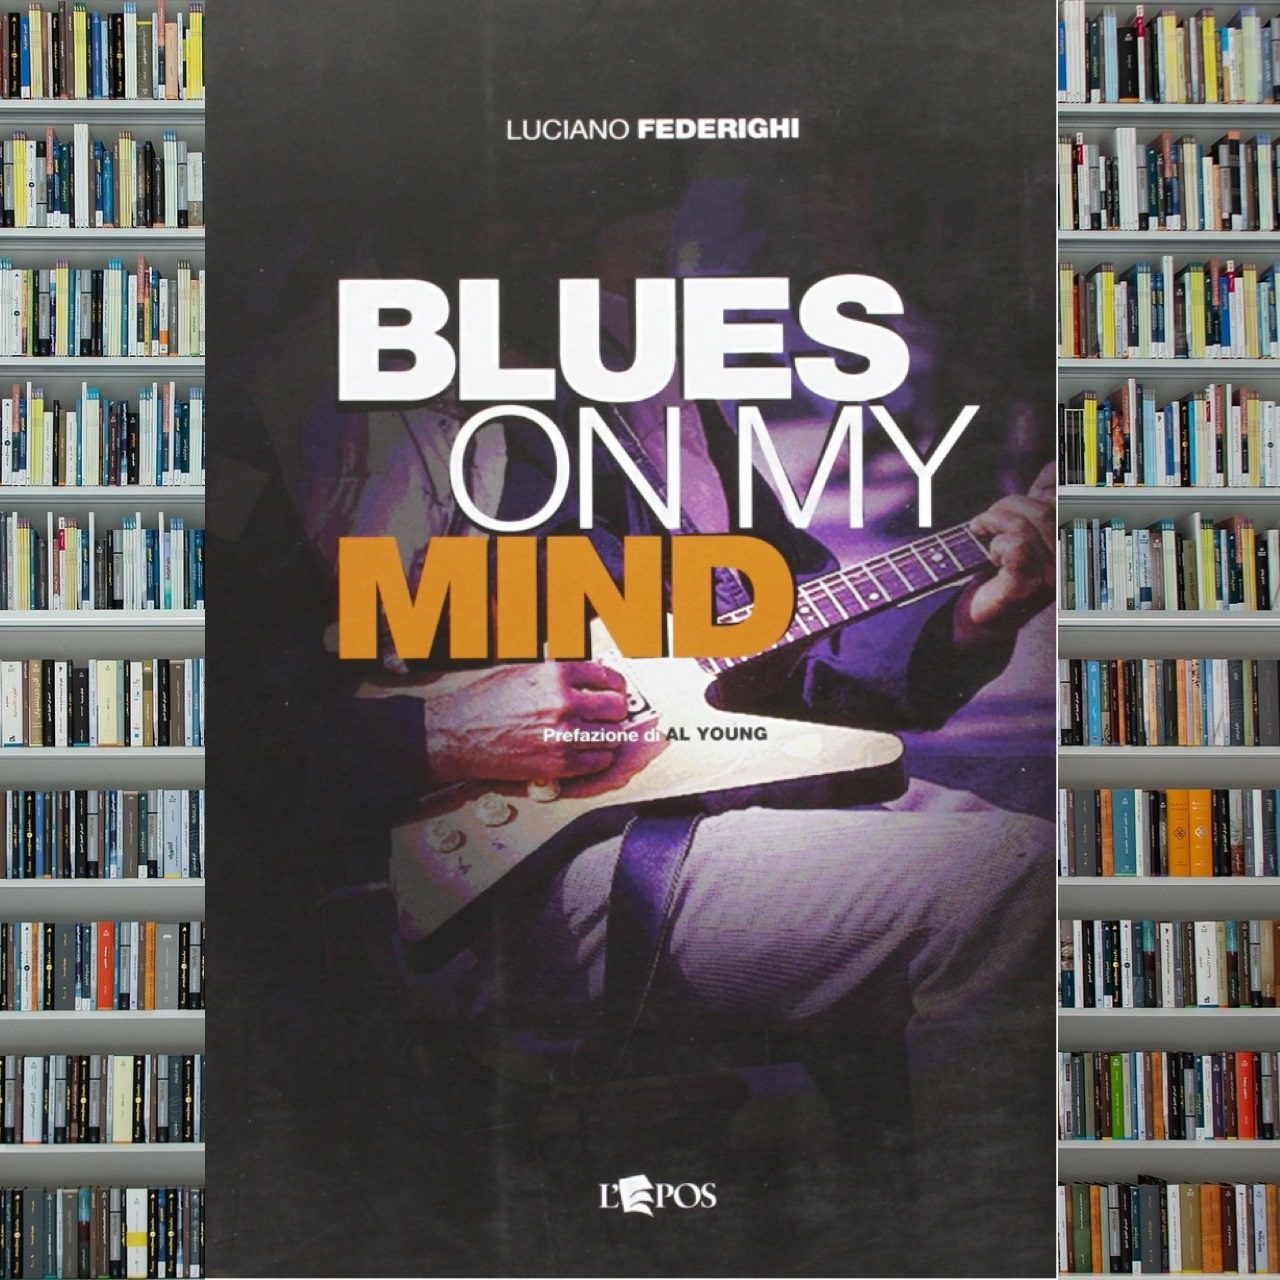 Luciano Federighi - Blues on my mind cover book